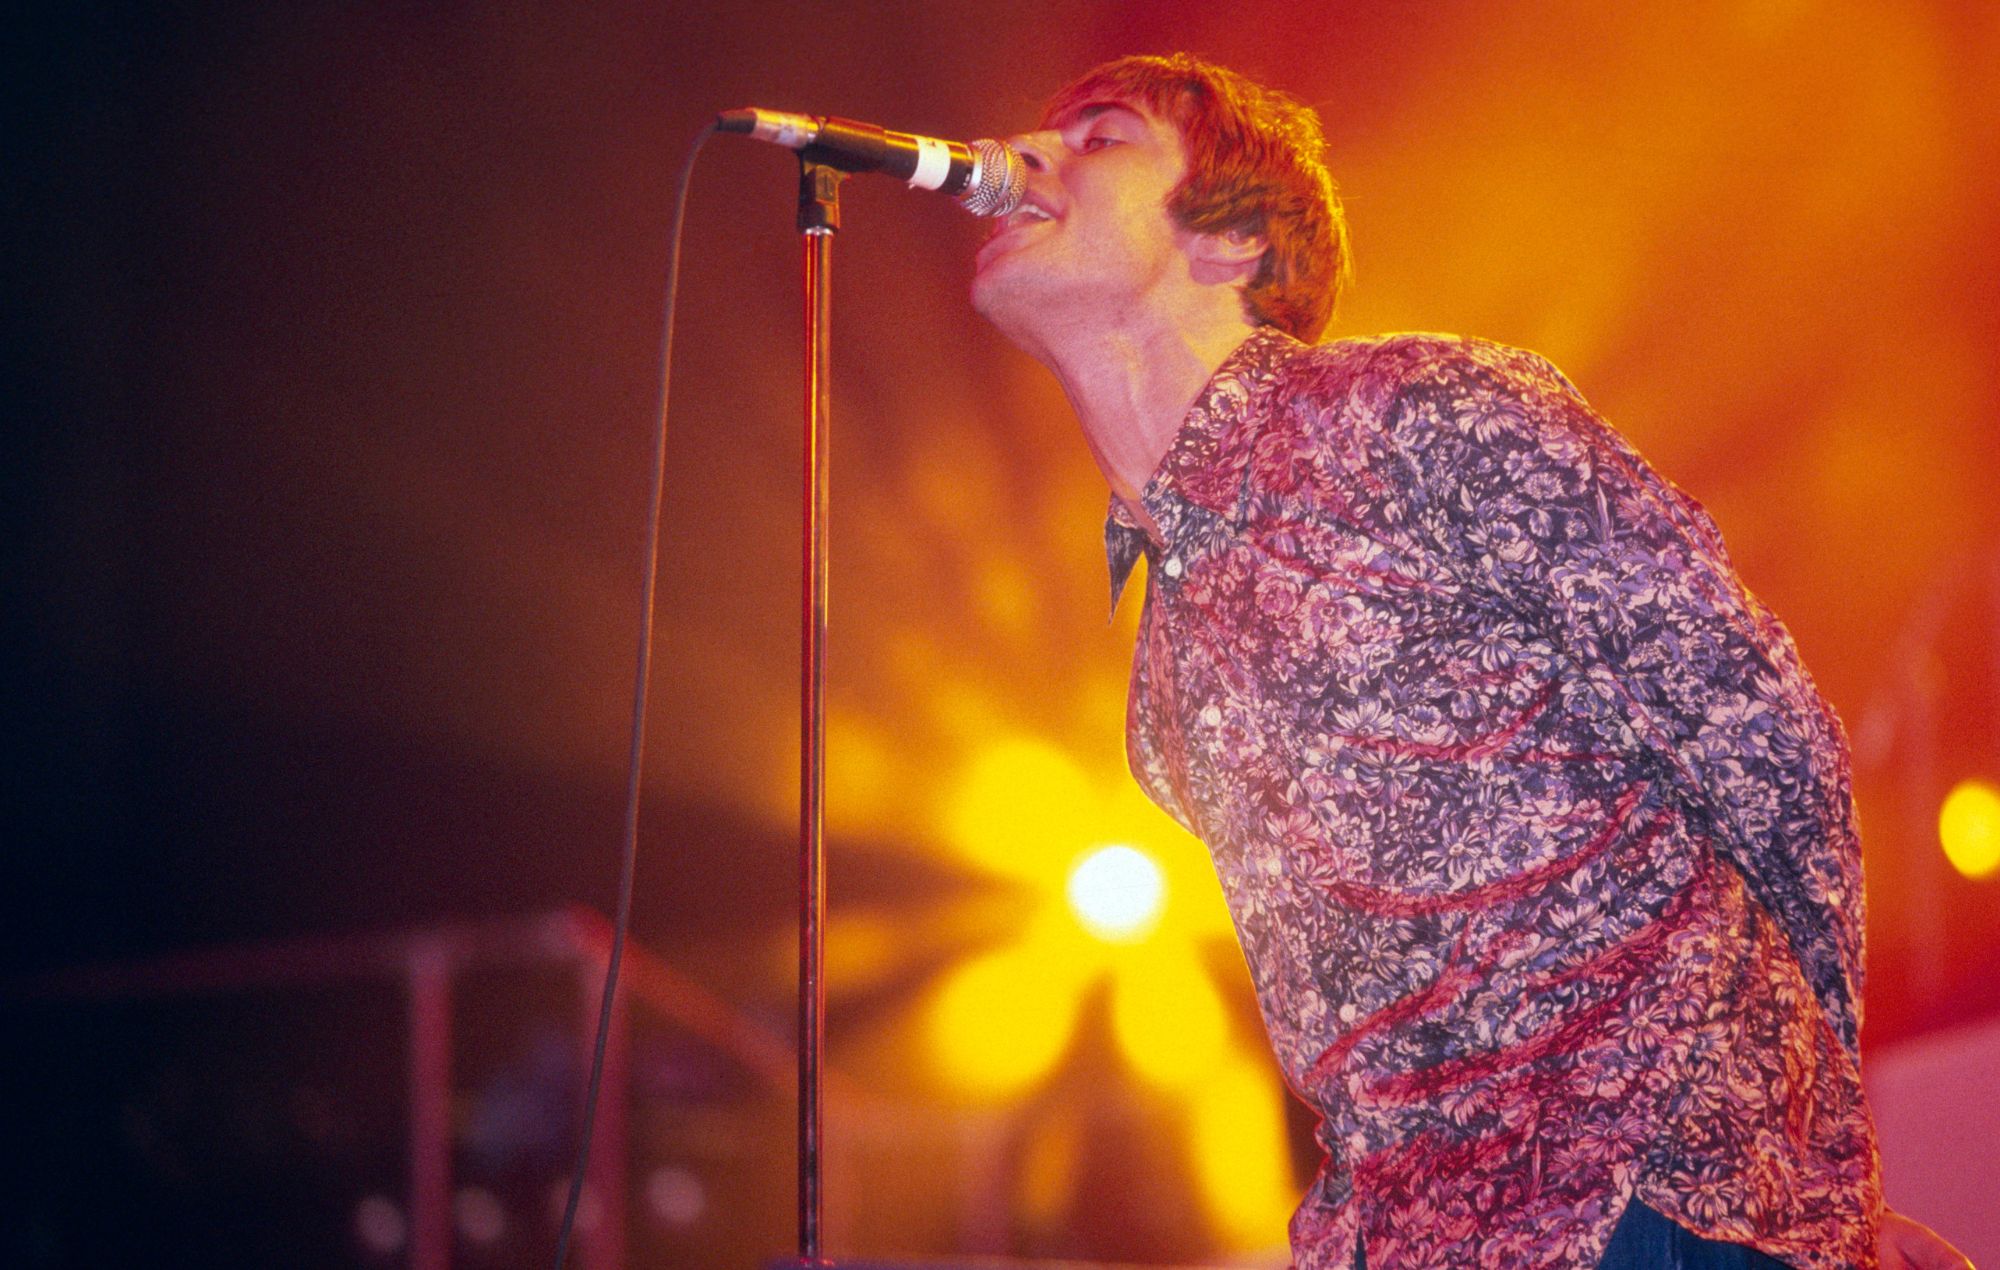 Oasis’ classic ‘…There And Then’ live concert film now available to stream